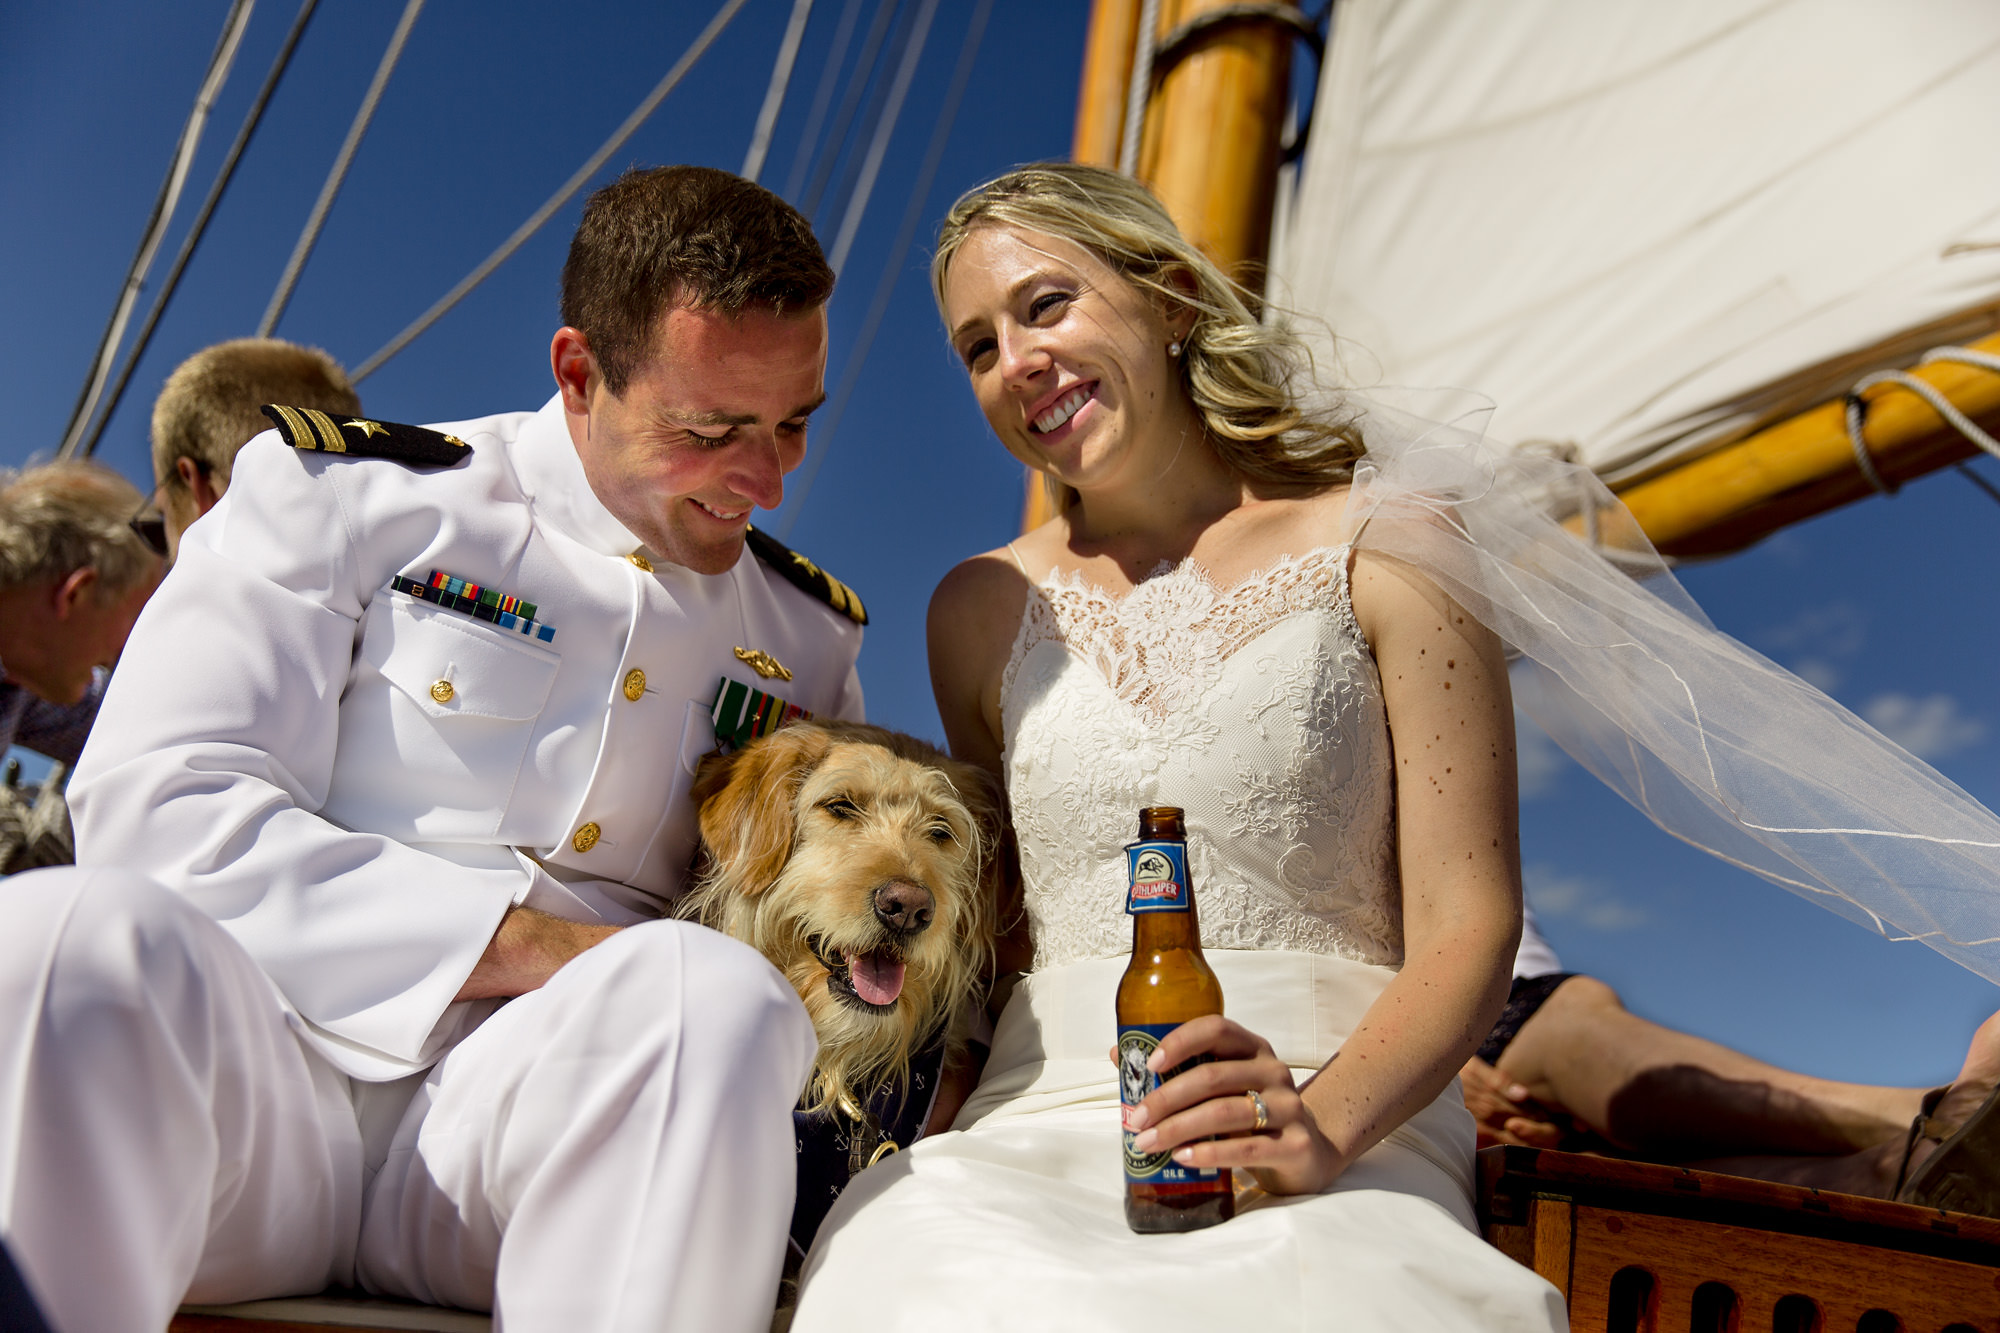 A bride and groom sail on the Schooner Olad after their wedding in Camden Harbor, Maine